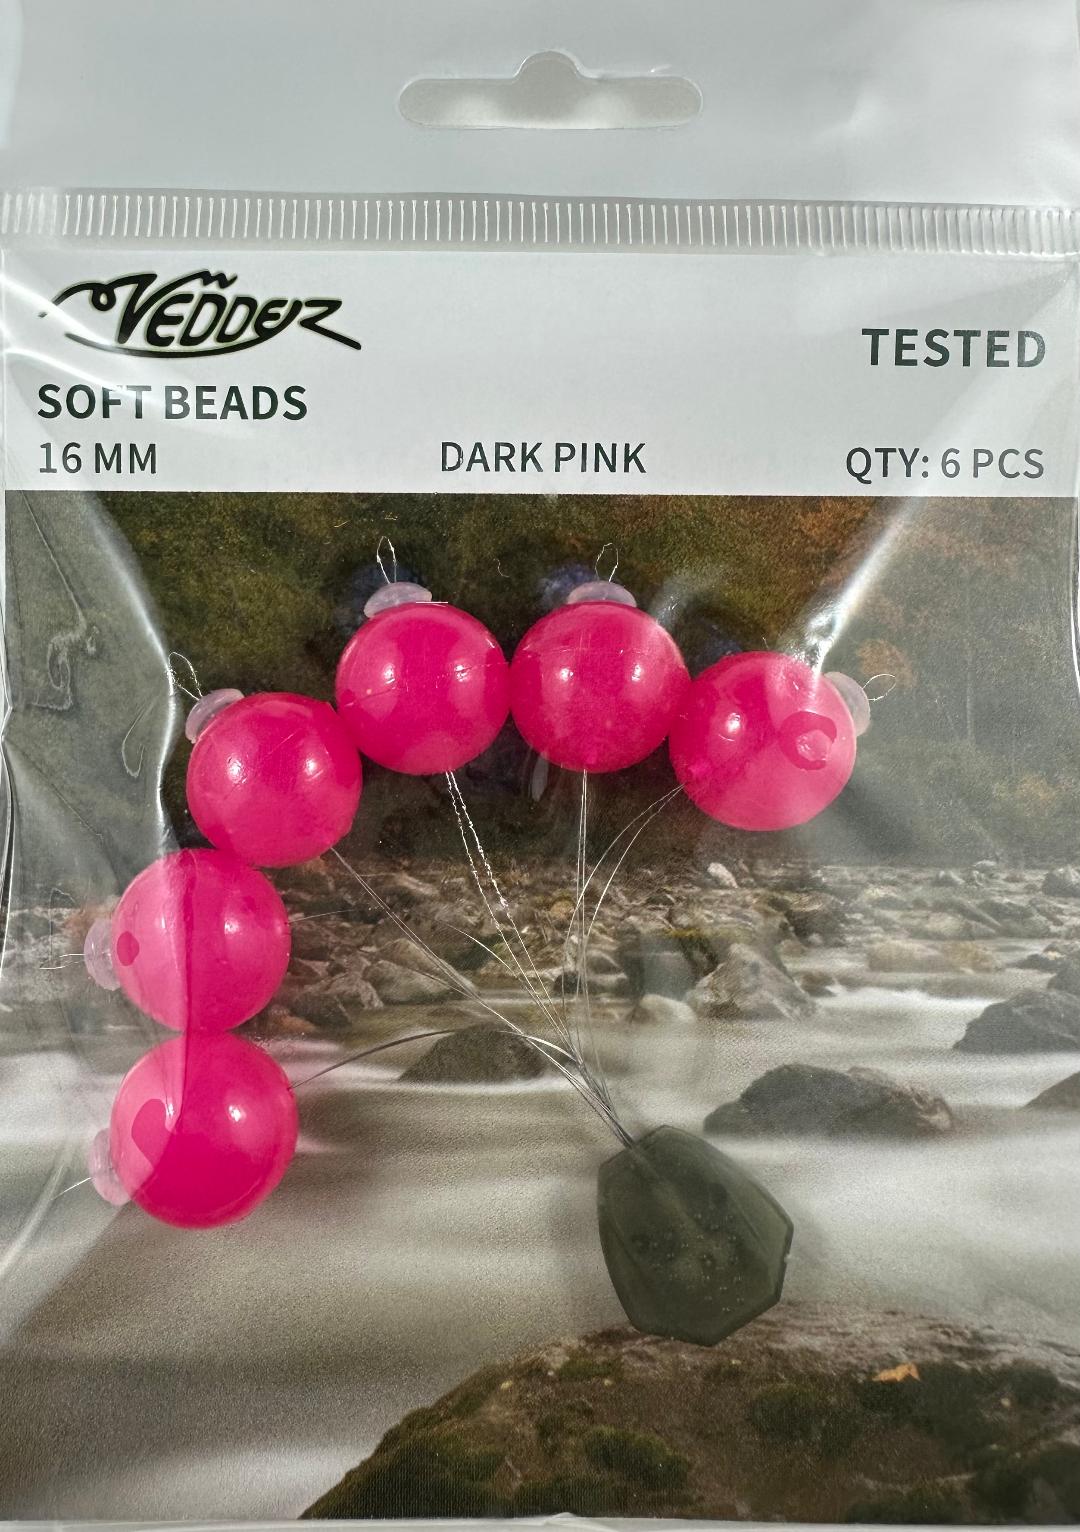 VSB-DP 16 Vedder 16 mm Dark pink soft beads x 6 with stoppers x 6